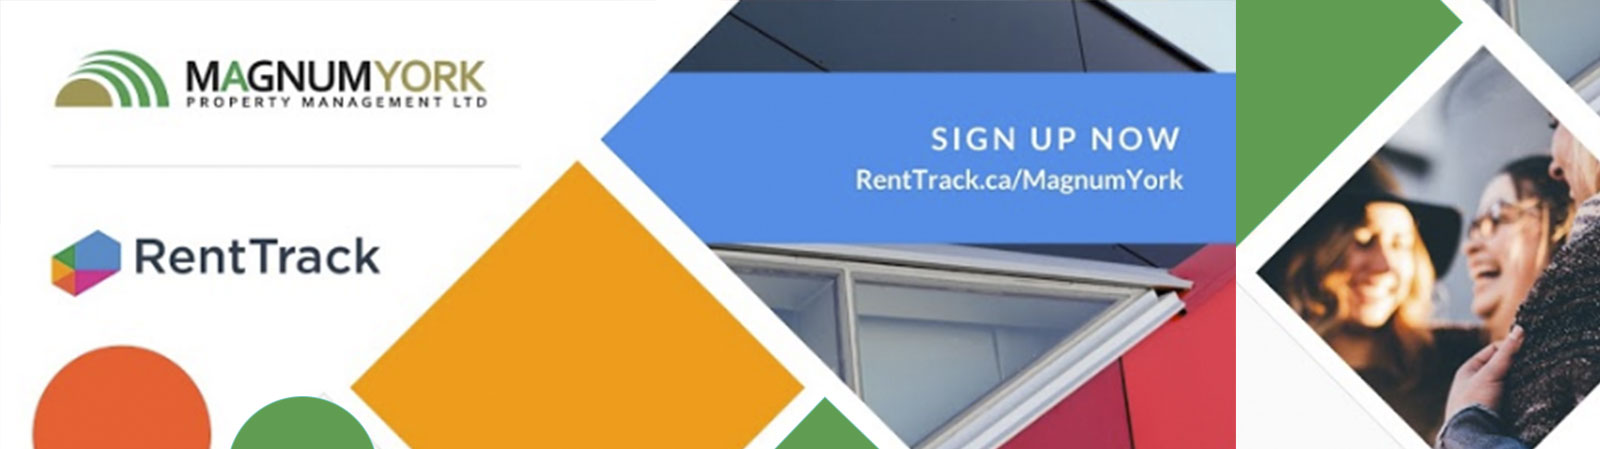 Online Payment RentTrack Improve credit score pay rent condo fees rent track